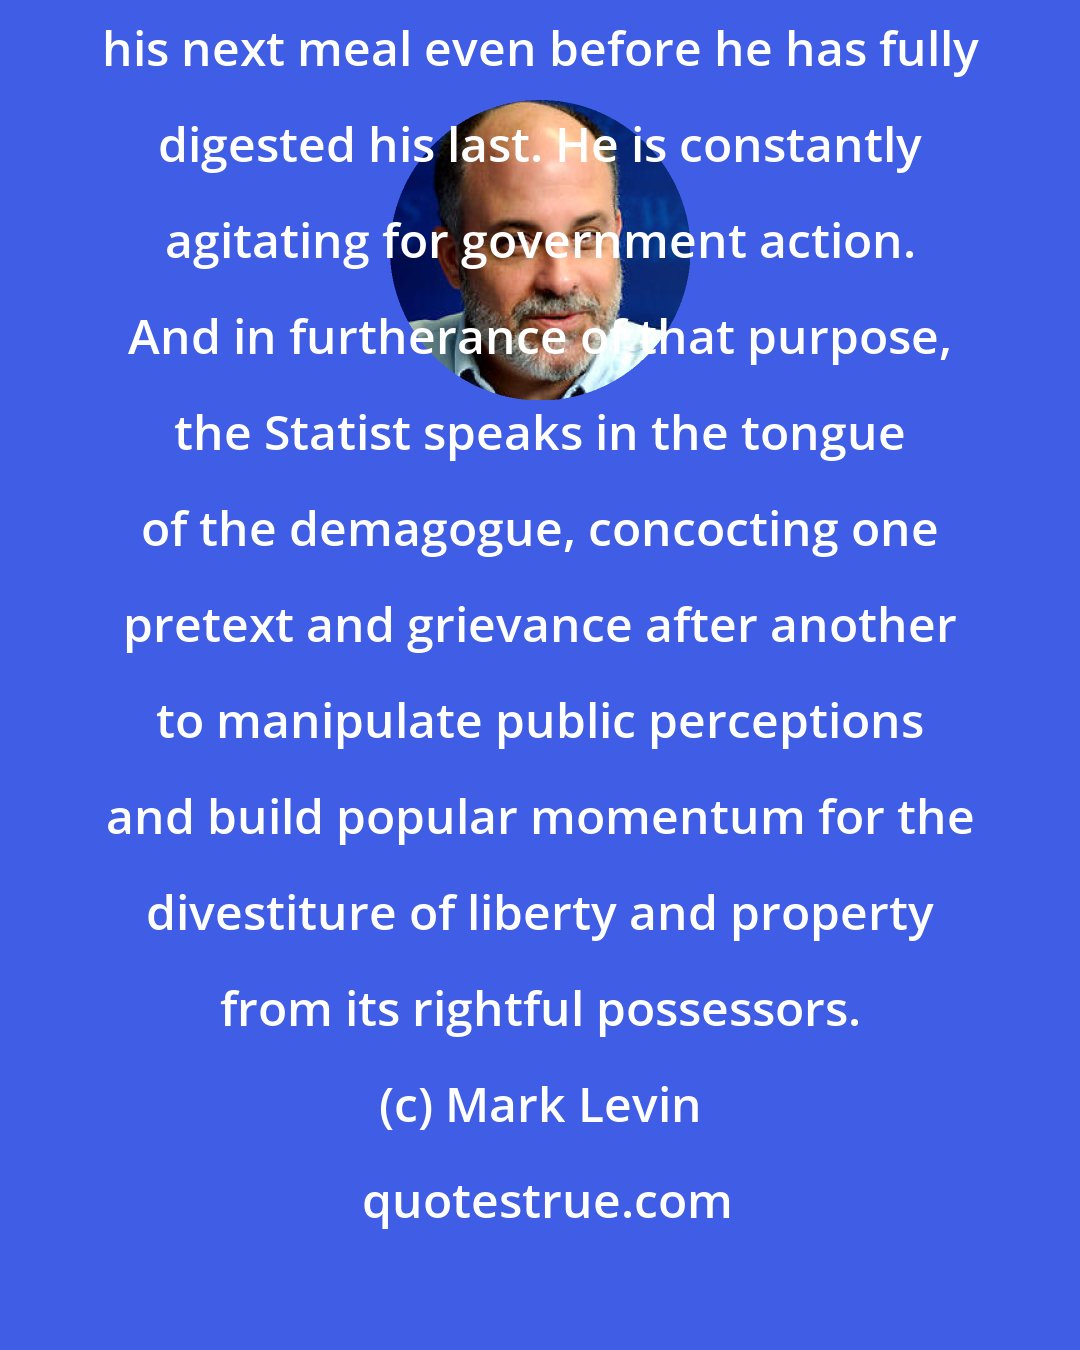 Mark Levin: The Statist has an insatiable appetite for control. His sights are set on his next meal even before he has fully digested his last. He is constantly agitating for government action. And in furtherance of that purpose, the Statist speaks in the tongue of the demagogue, concocting one pretext and grievance after another to manipulate public perceptions and build popular momentum for the divestiture of liberty and property from its rightful possessors.